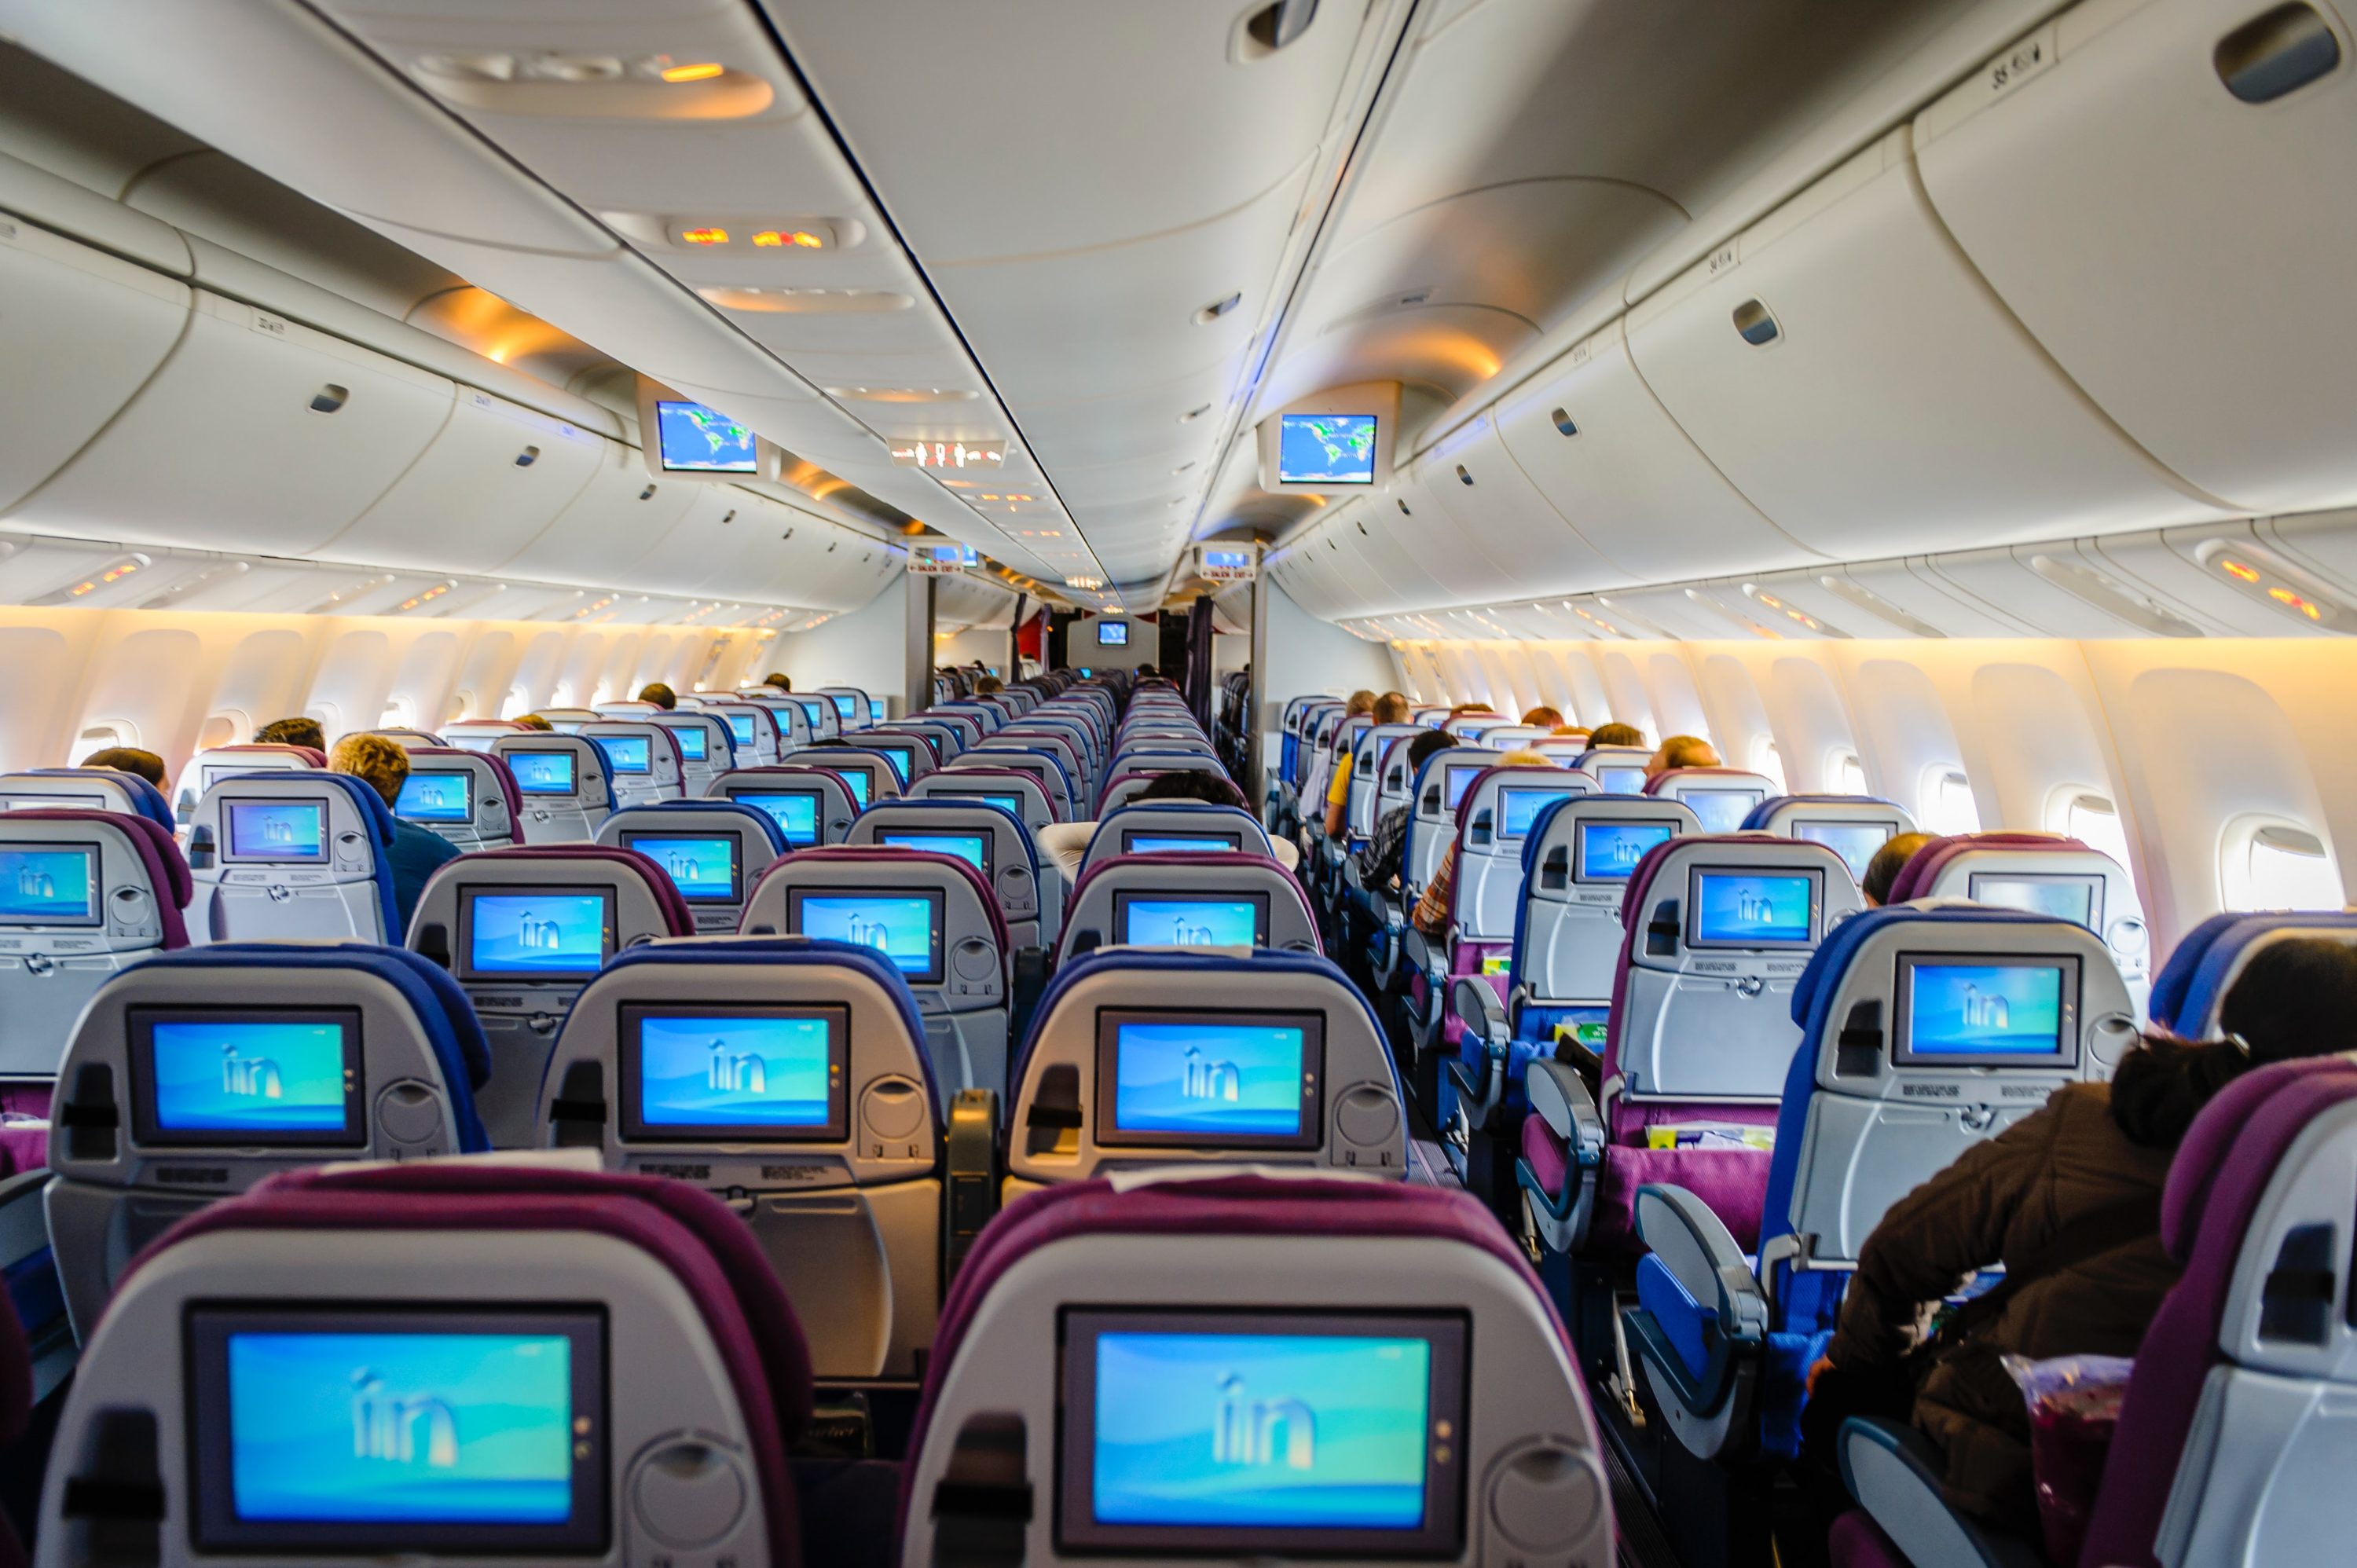 46 Amazing Airplane Hacks To Boost Your Flight/Travel Experience